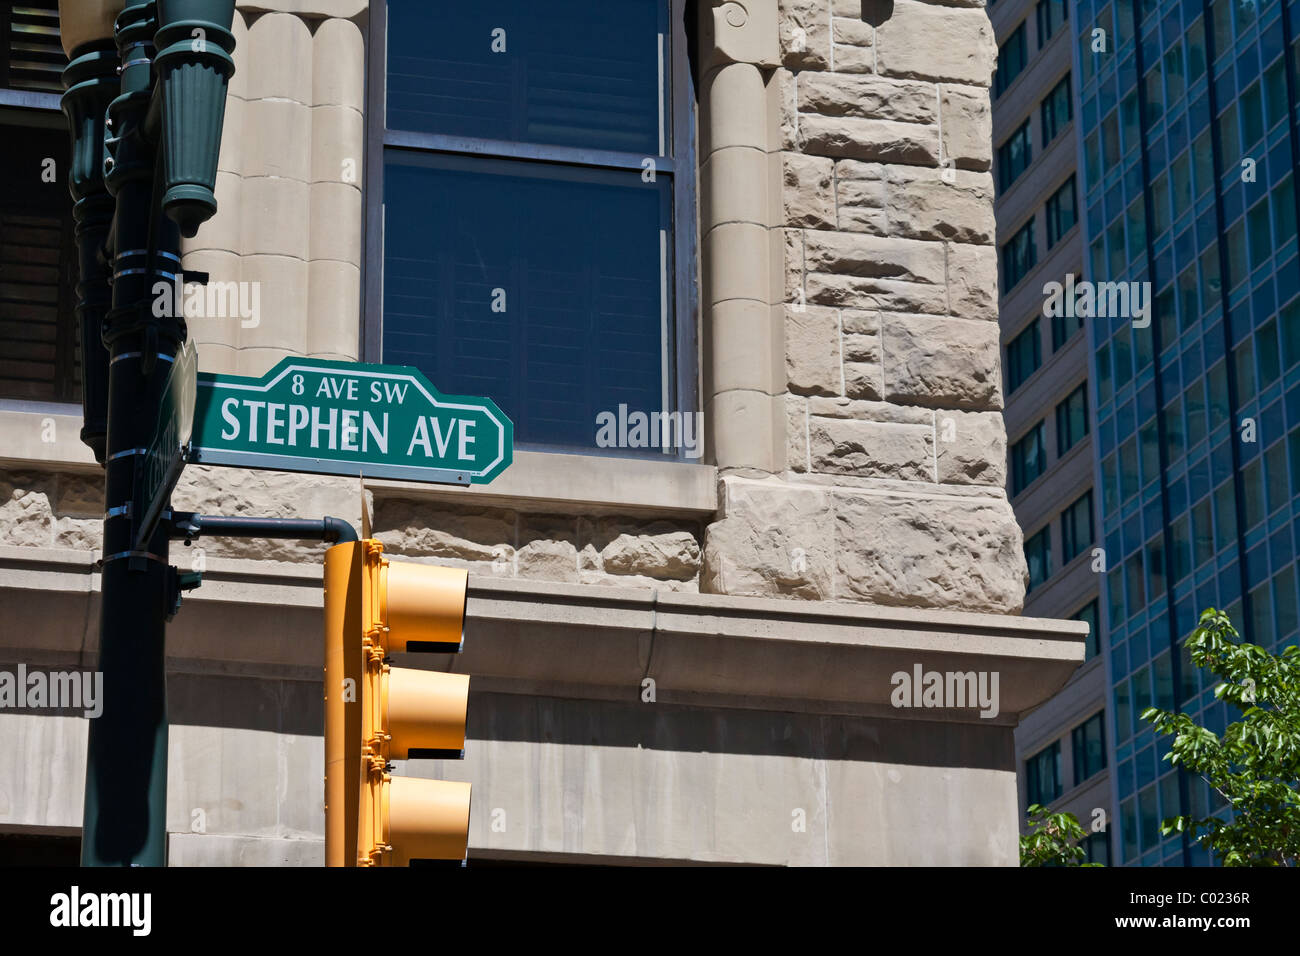 Street sign and traffic stop lights at Stephen Avenue 8th SW in downtown Calgary, Canada Stock Photo